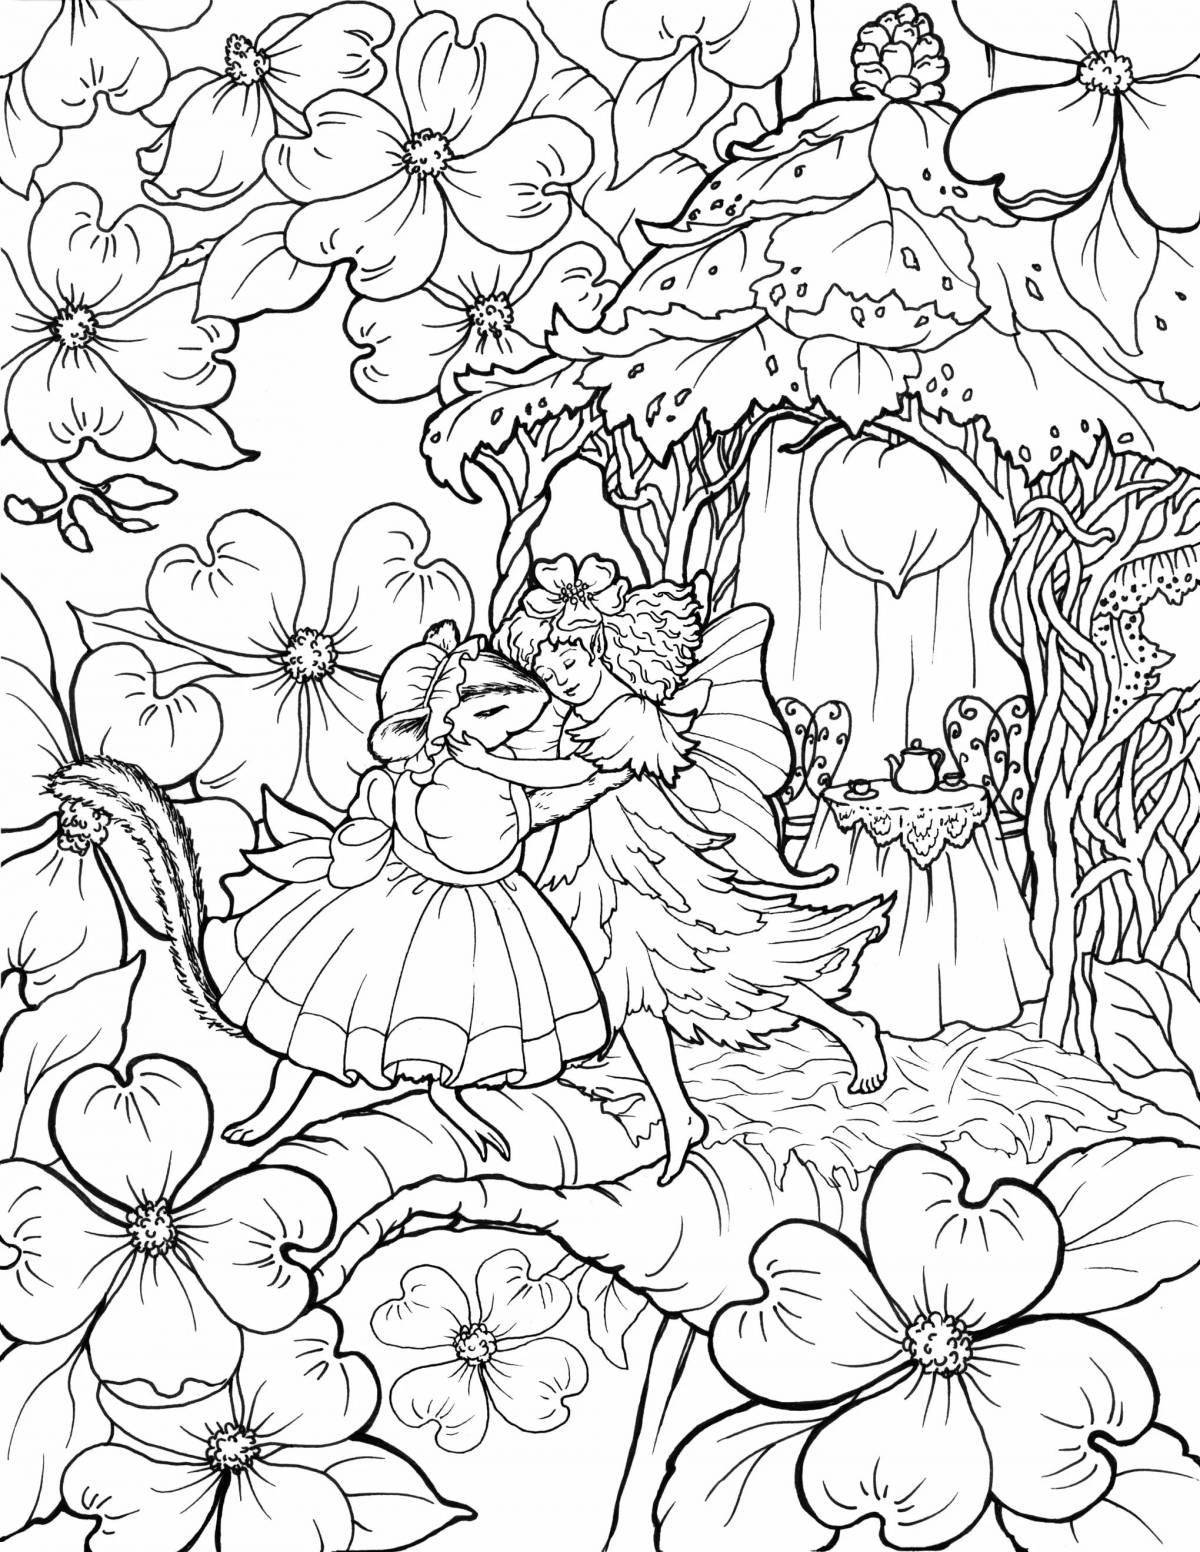 Peaceful coloring of the magical world of fairies